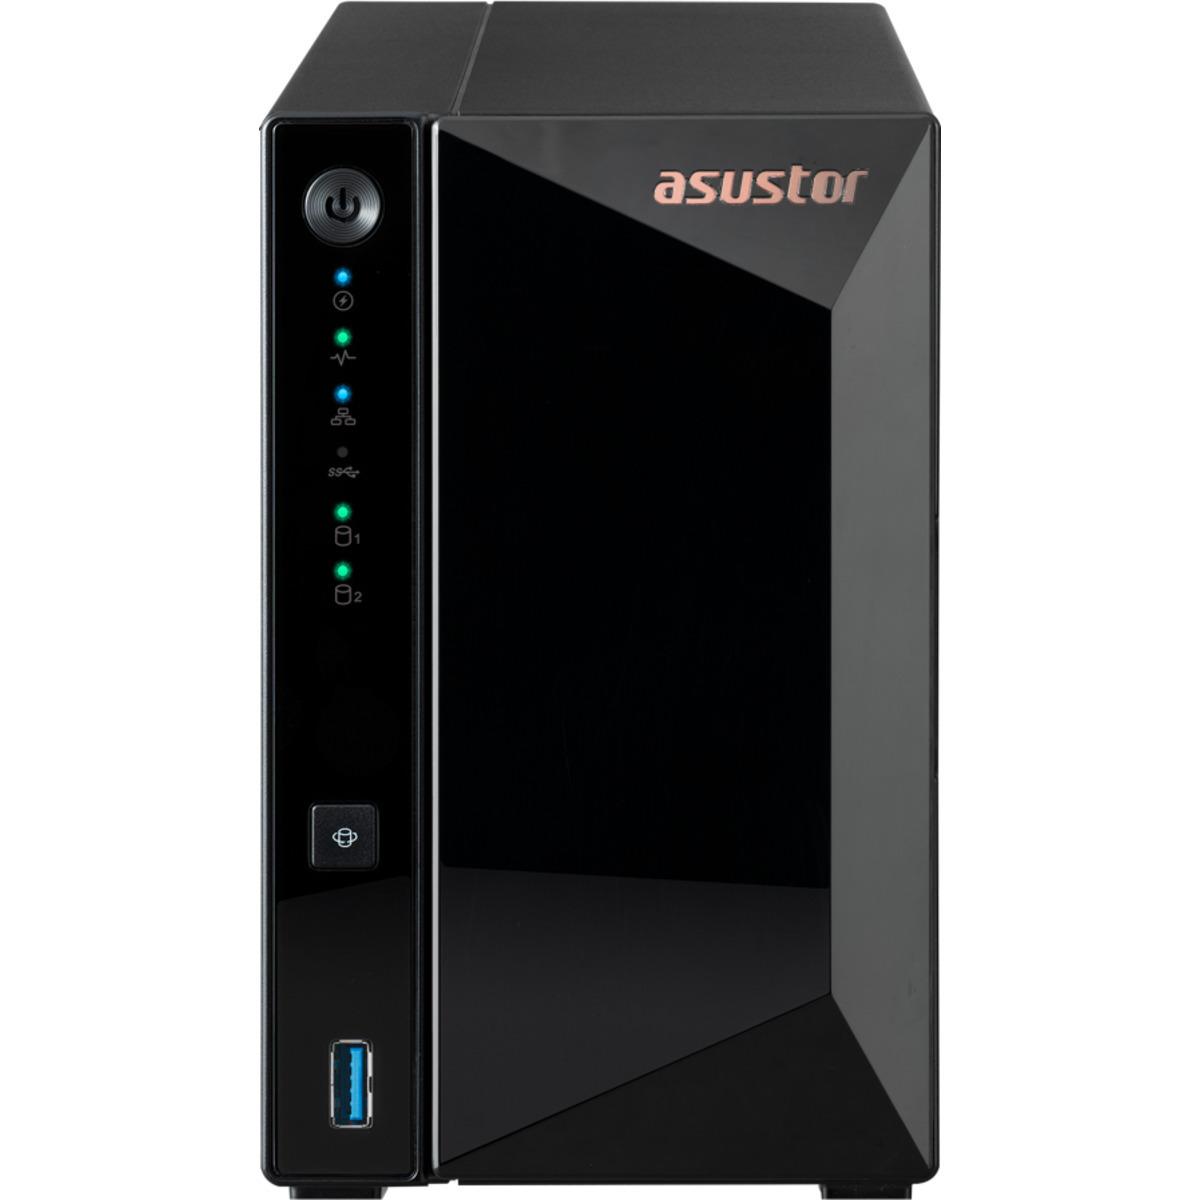 buy $856 ASUSTOR DRIVESTOR 2 Pro AS3302T 8tb Desktop NAS - Network Attached Storage Device 2x4000gb Samsung 870 EVO MZ-77E4T0BAM 2.5 560/530MB/s SATA 6Gb/s SSD CONSUMER Class Drives Installed - Burn-In Tested - nas headquarters buy network attached storage server device das new raid-5 free shipping simply usa DRIVESTOR 2 Pro AS3302T